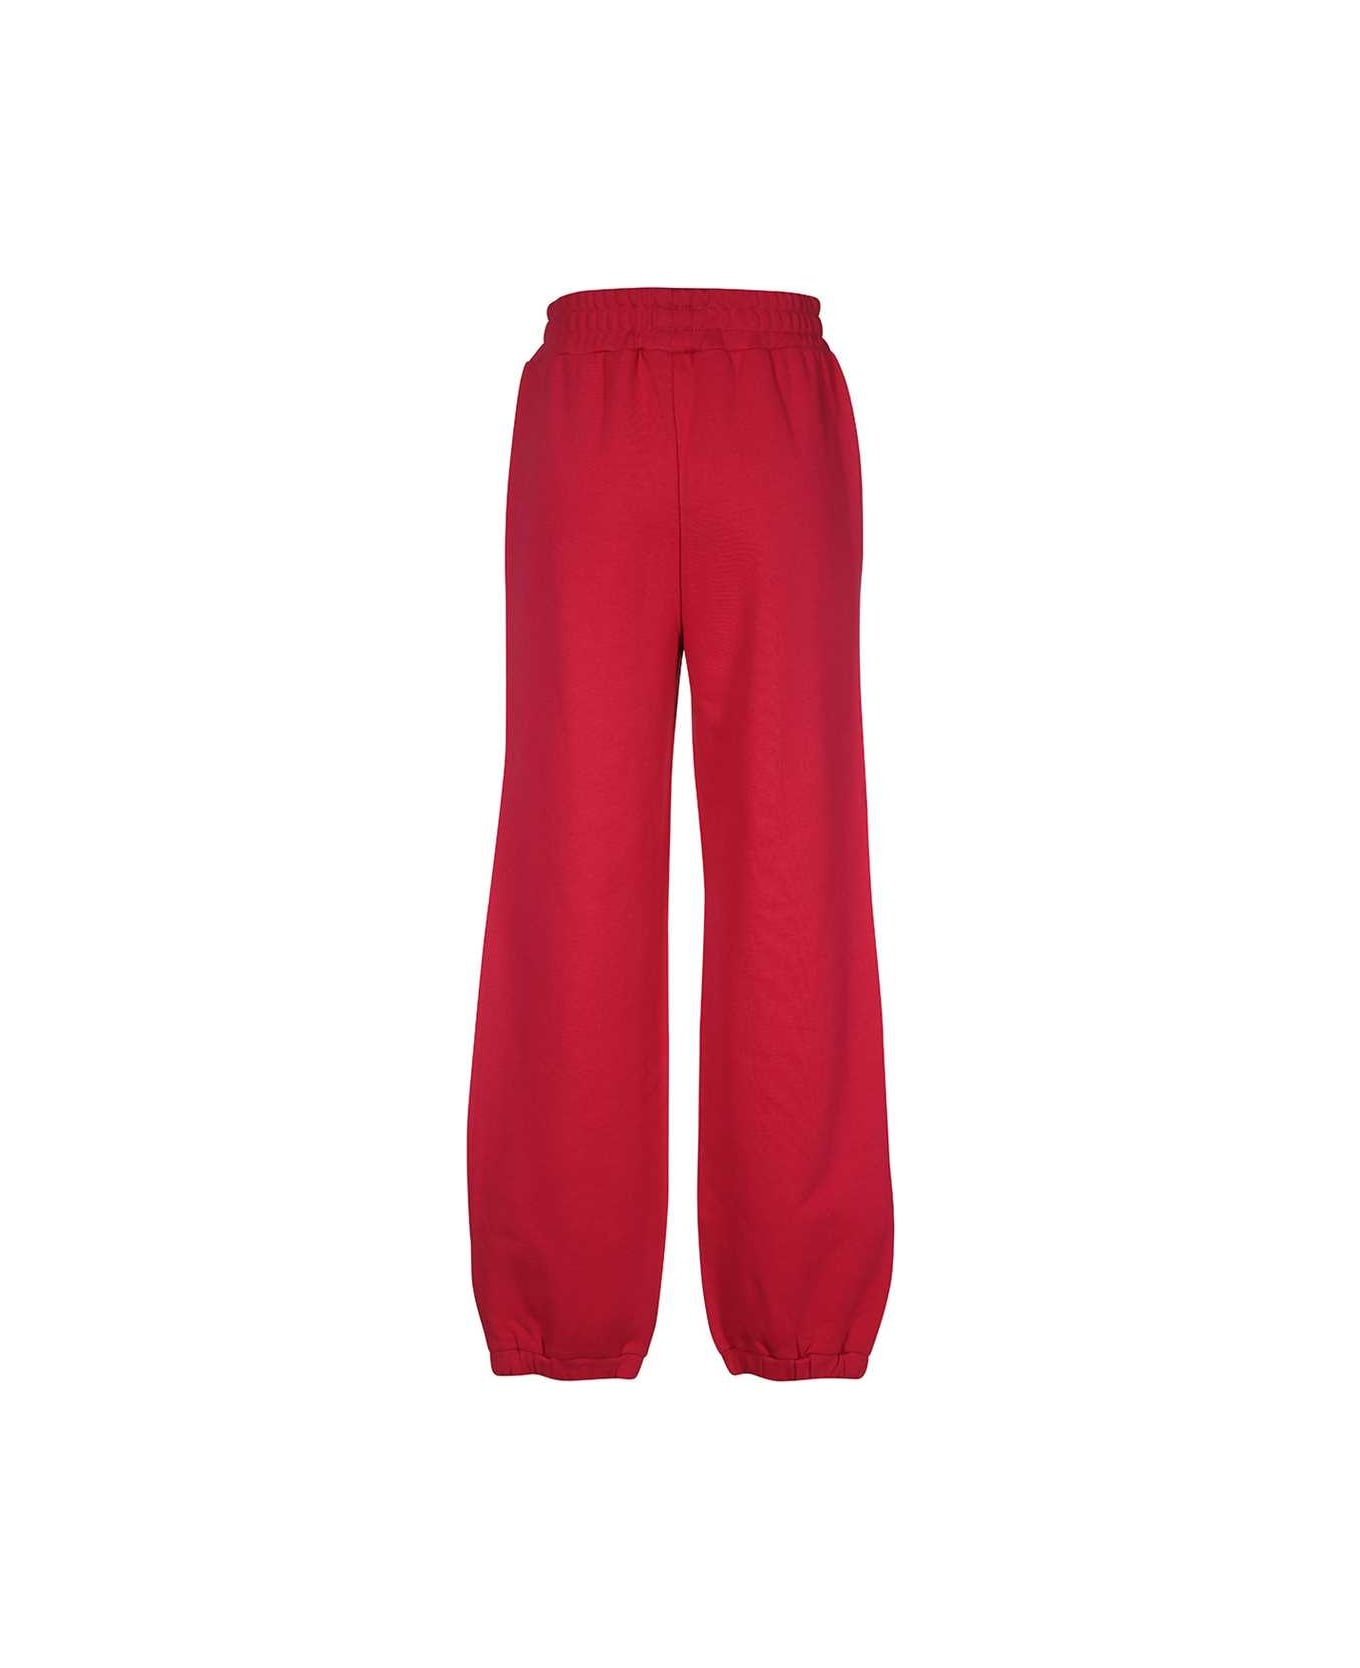 Versace Jeans Couture Logo Print Sweatpants - red